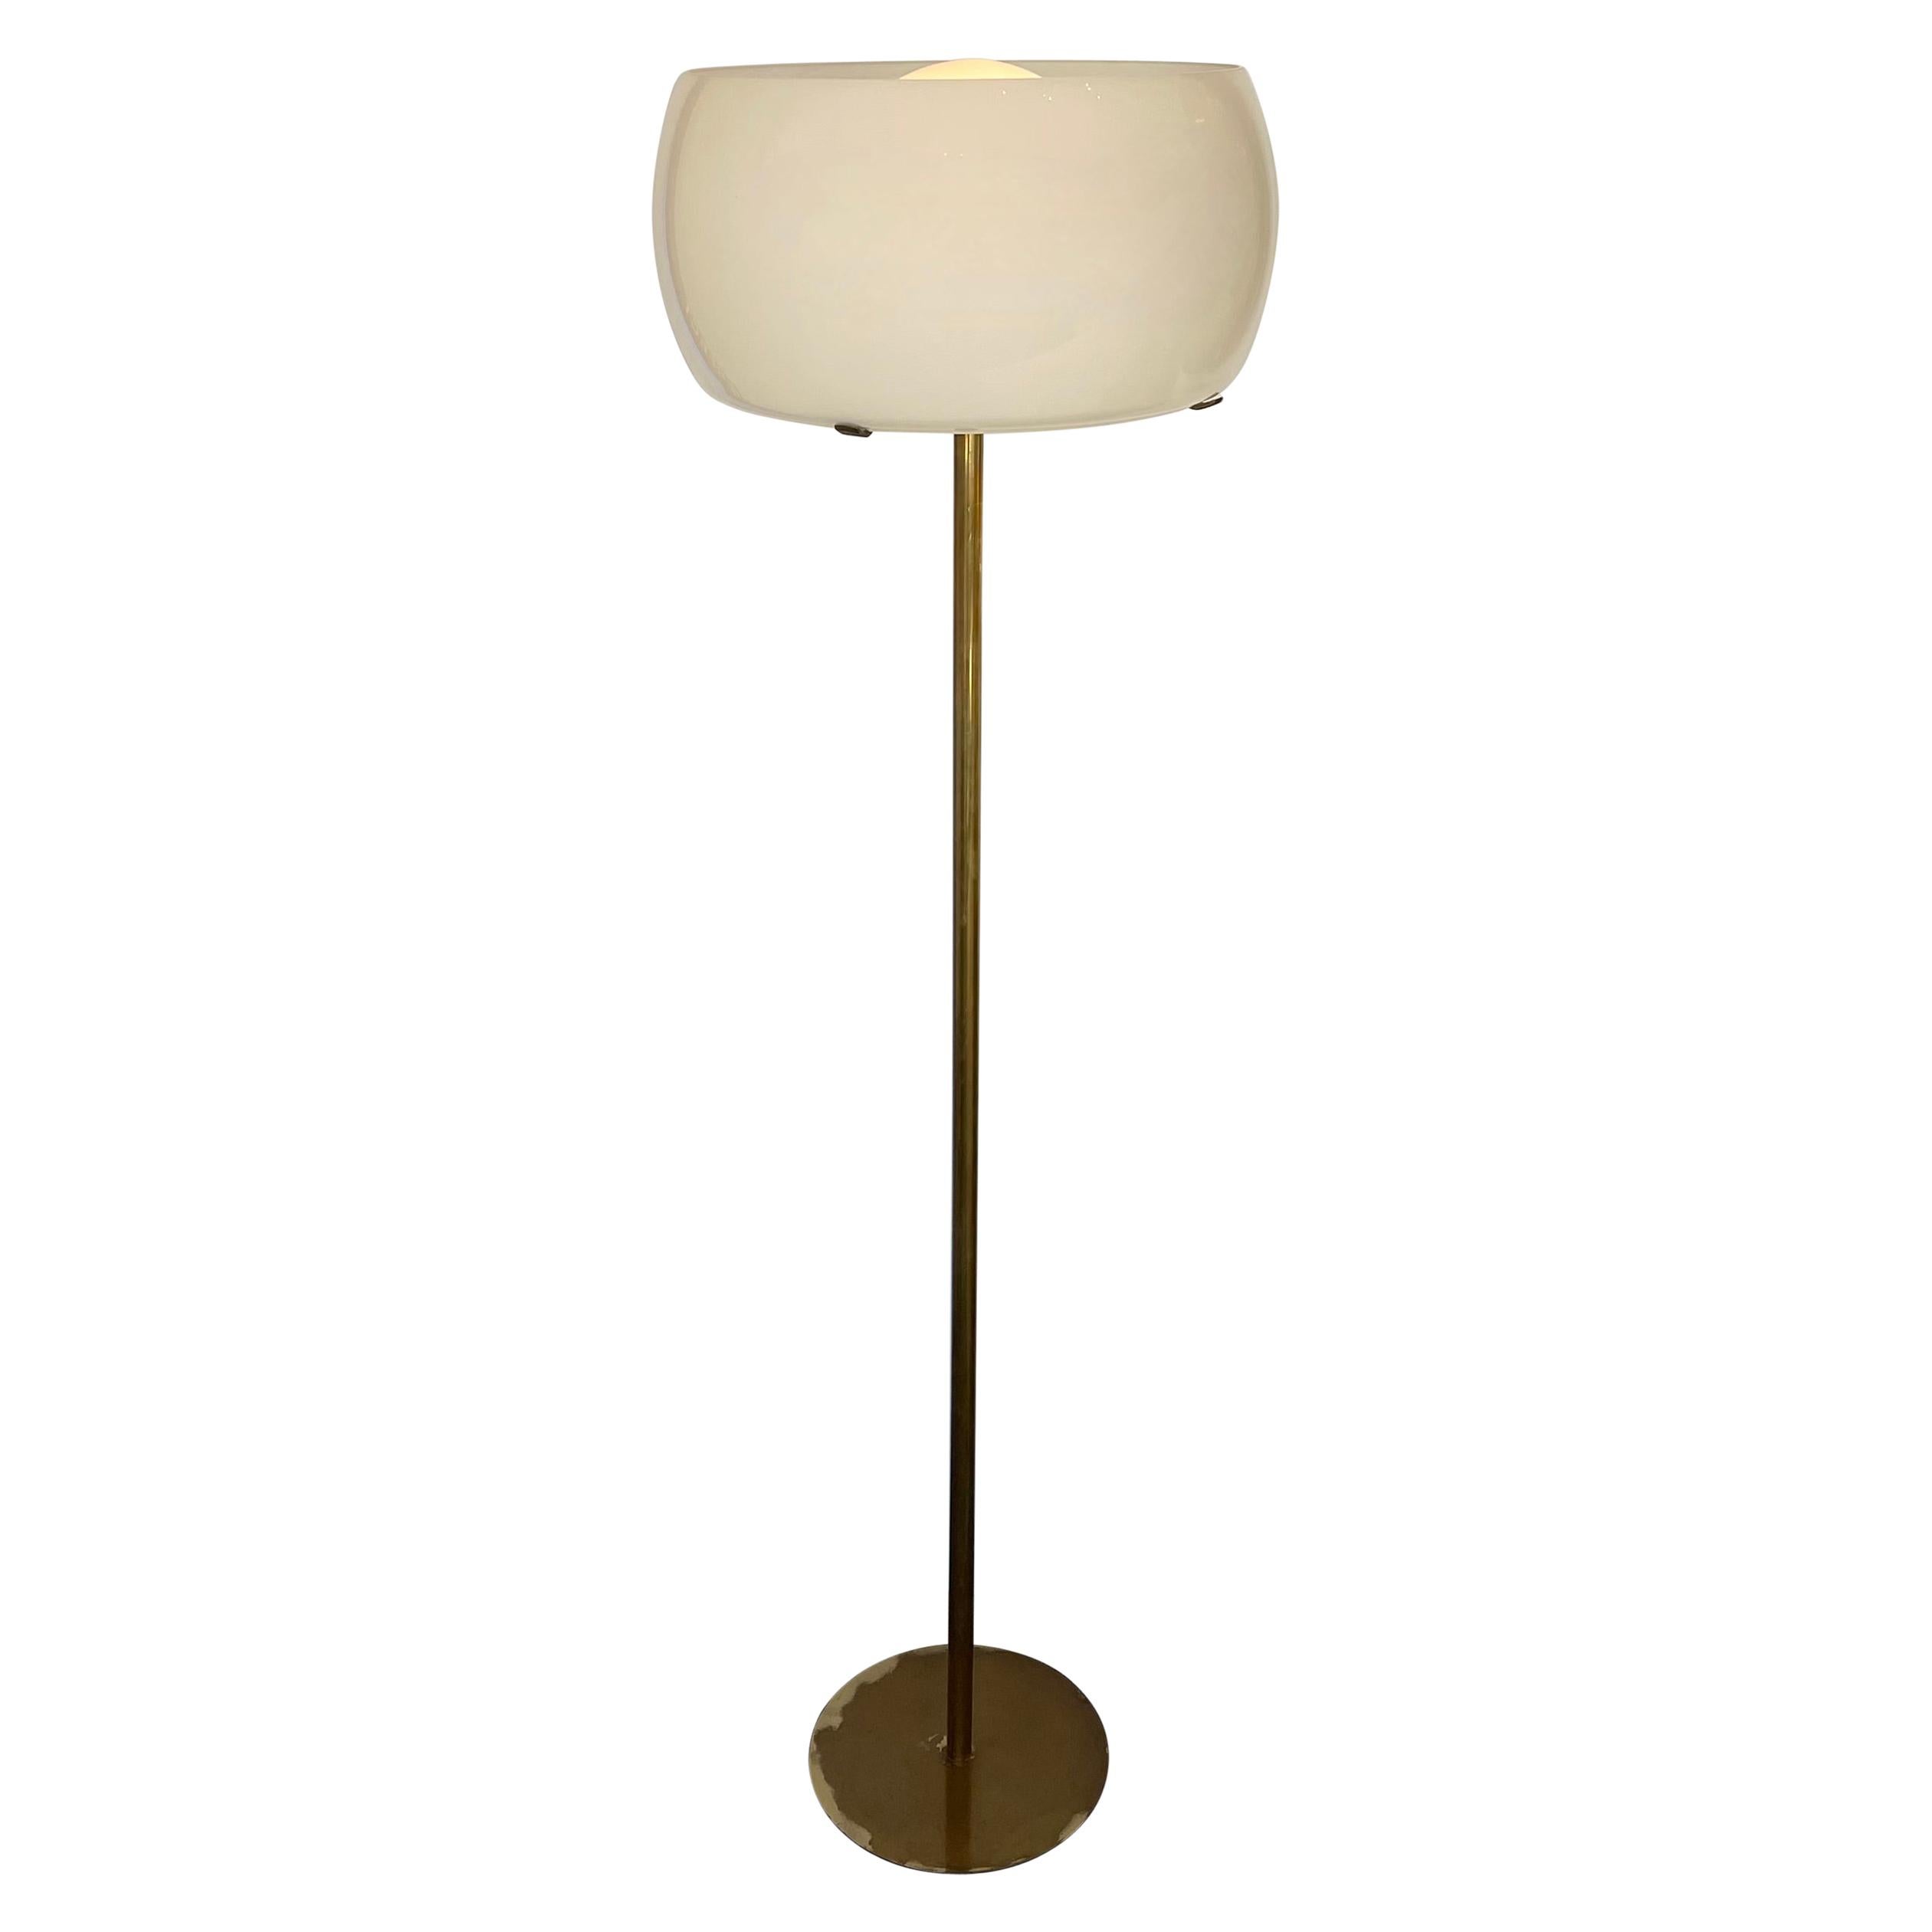  Brass Floor Lamp Clitunno by Vico Magistretti for Artemide, Italy, 1964